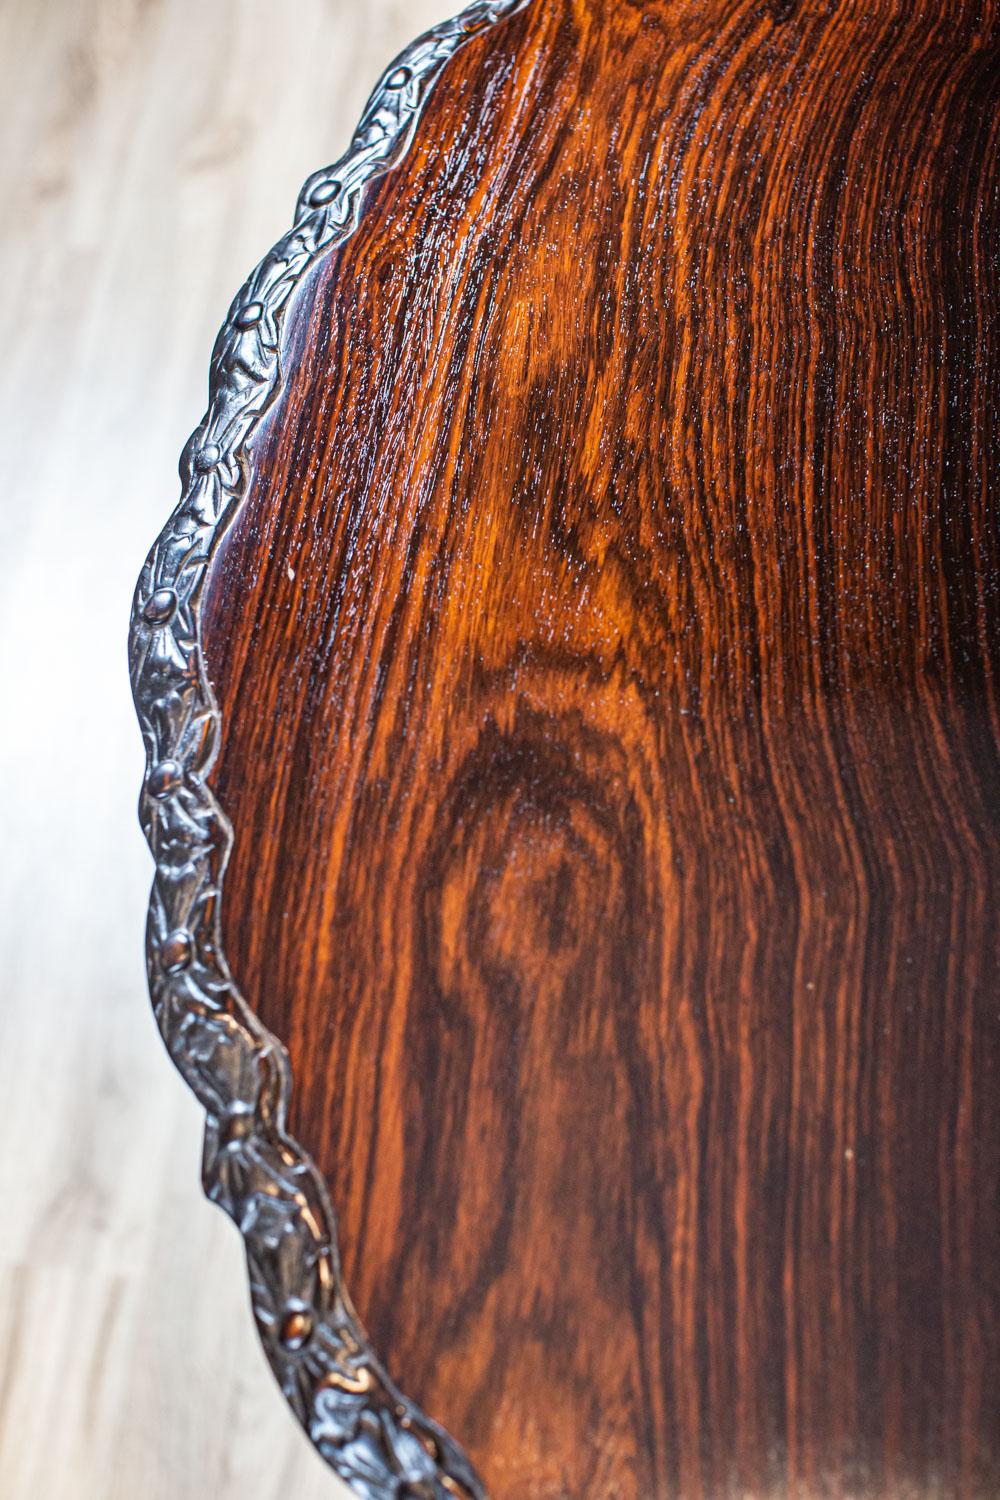 Decorative Rosewood Table from the Turn of the 19th and 20th Centuries For Sale 1